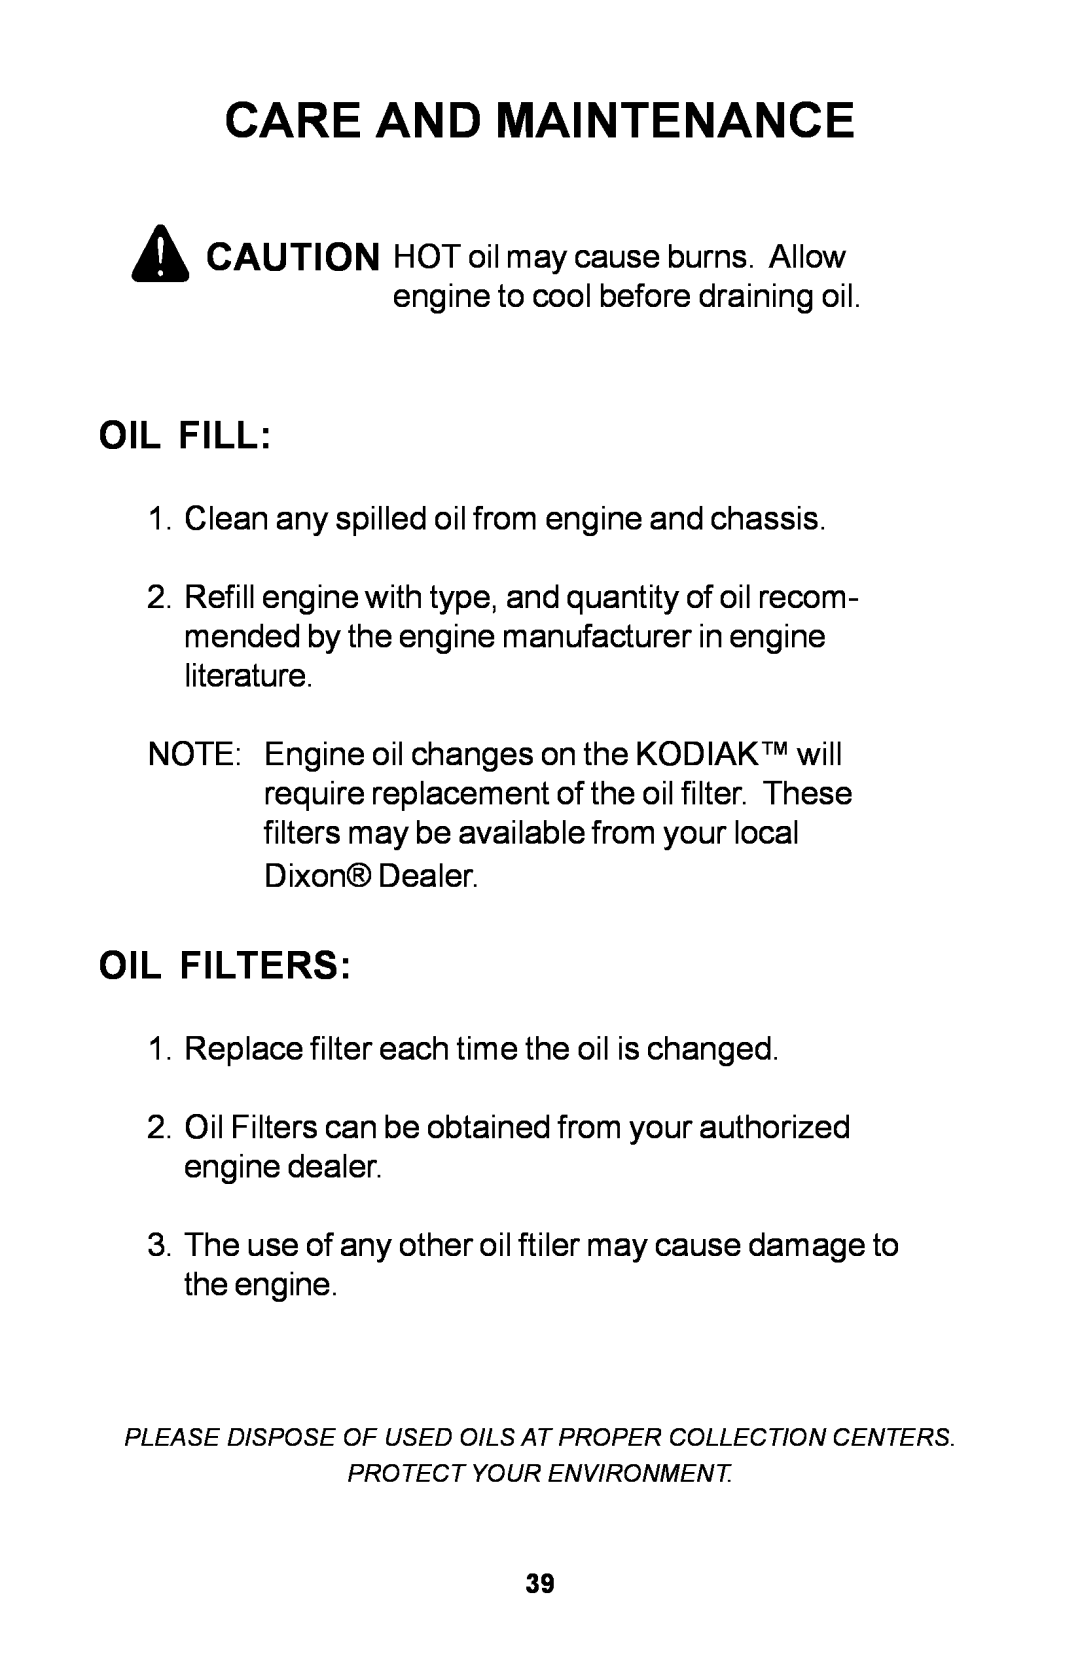 Dixon ZTR manual Oil Fill, Oil Filters, Care And Maintenance 